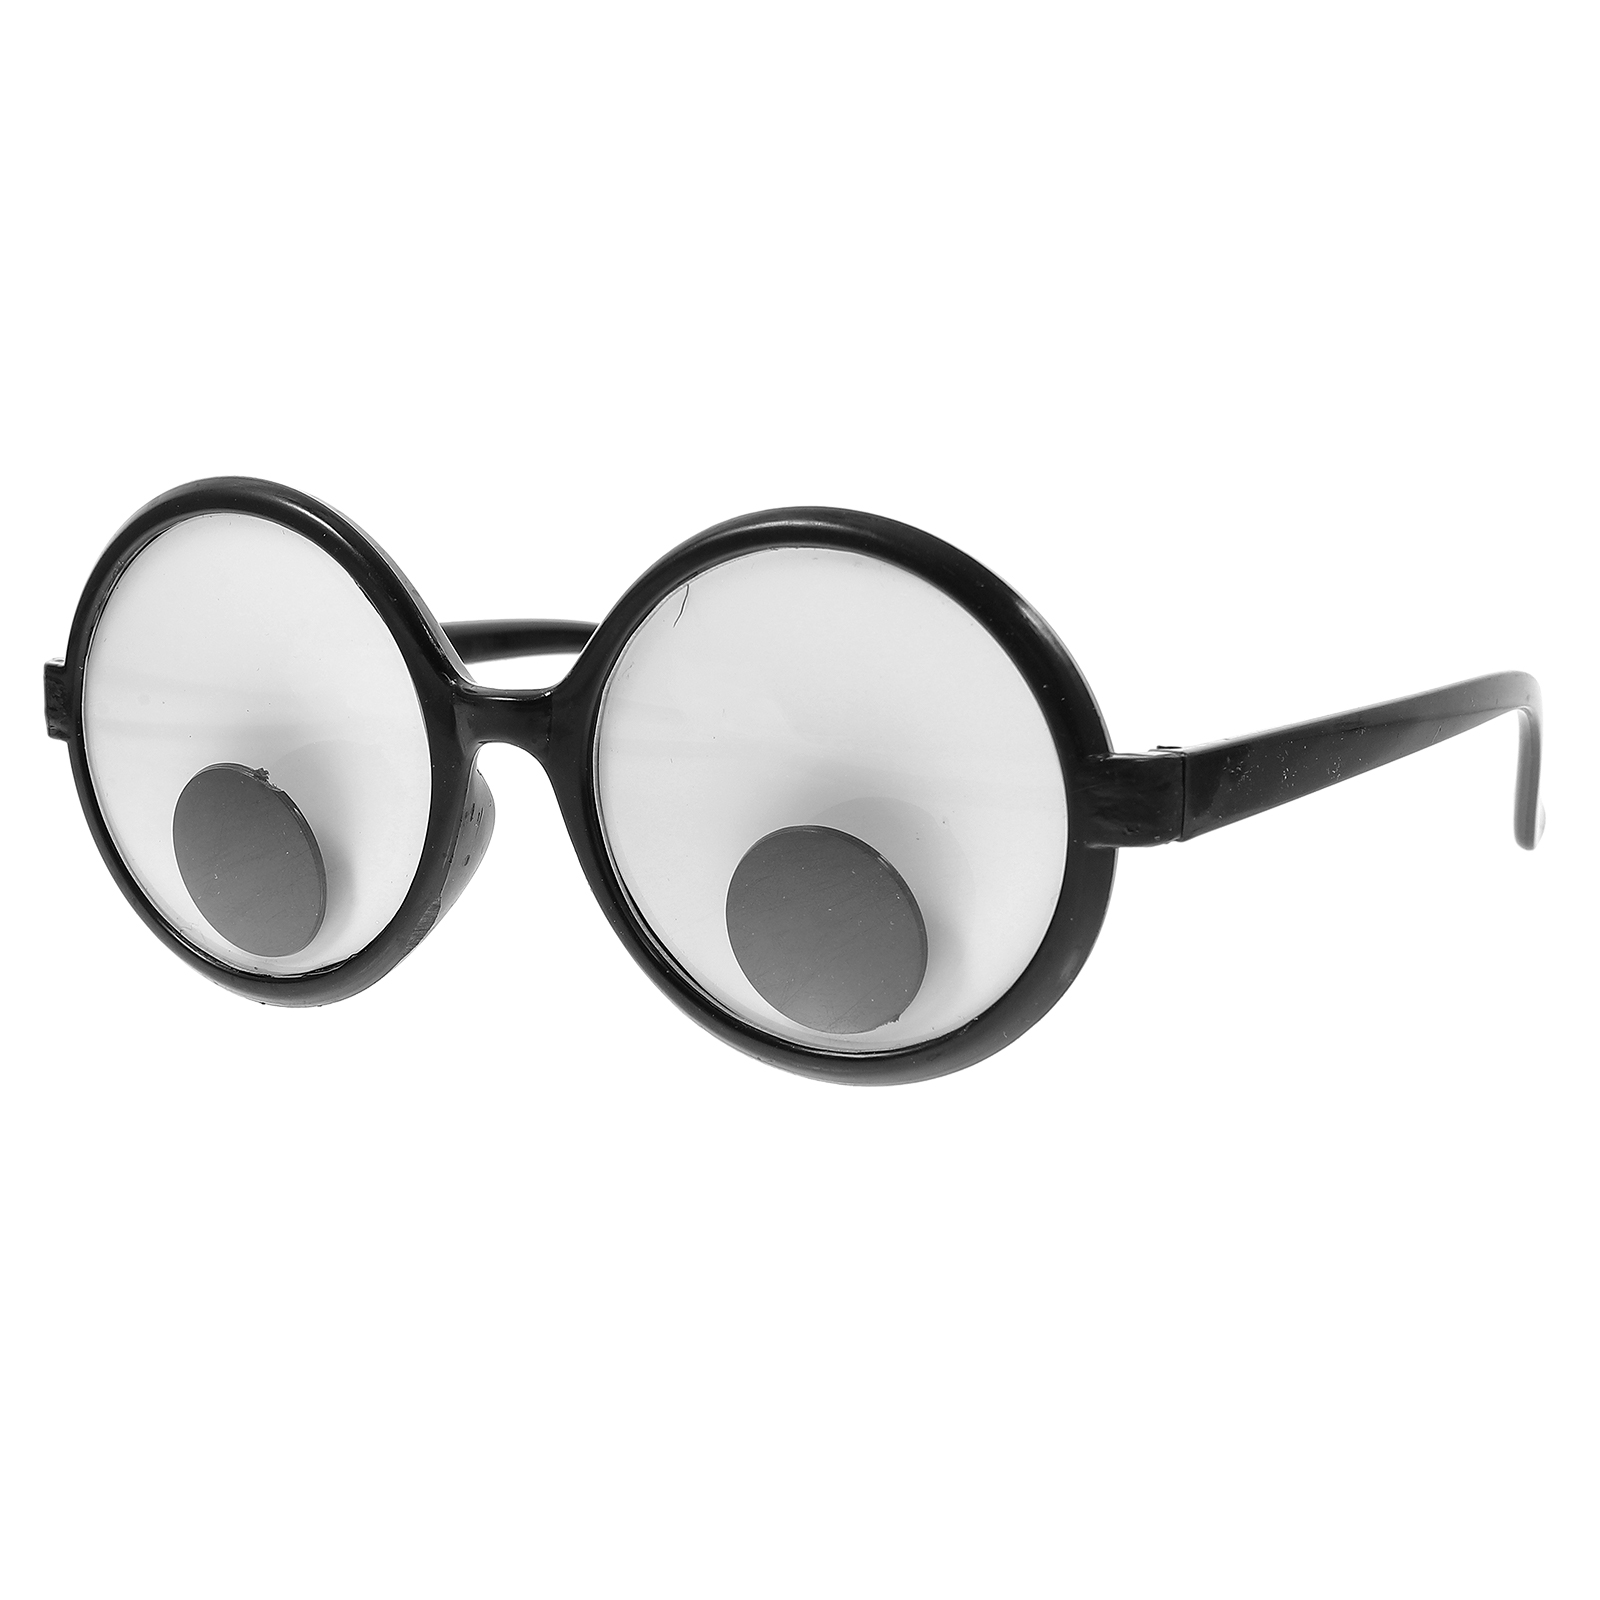 Party Supply Festival Glasses Prop Movable Eyeball Safety Glases Fashionable Halloween Plastic - image 1 of 6